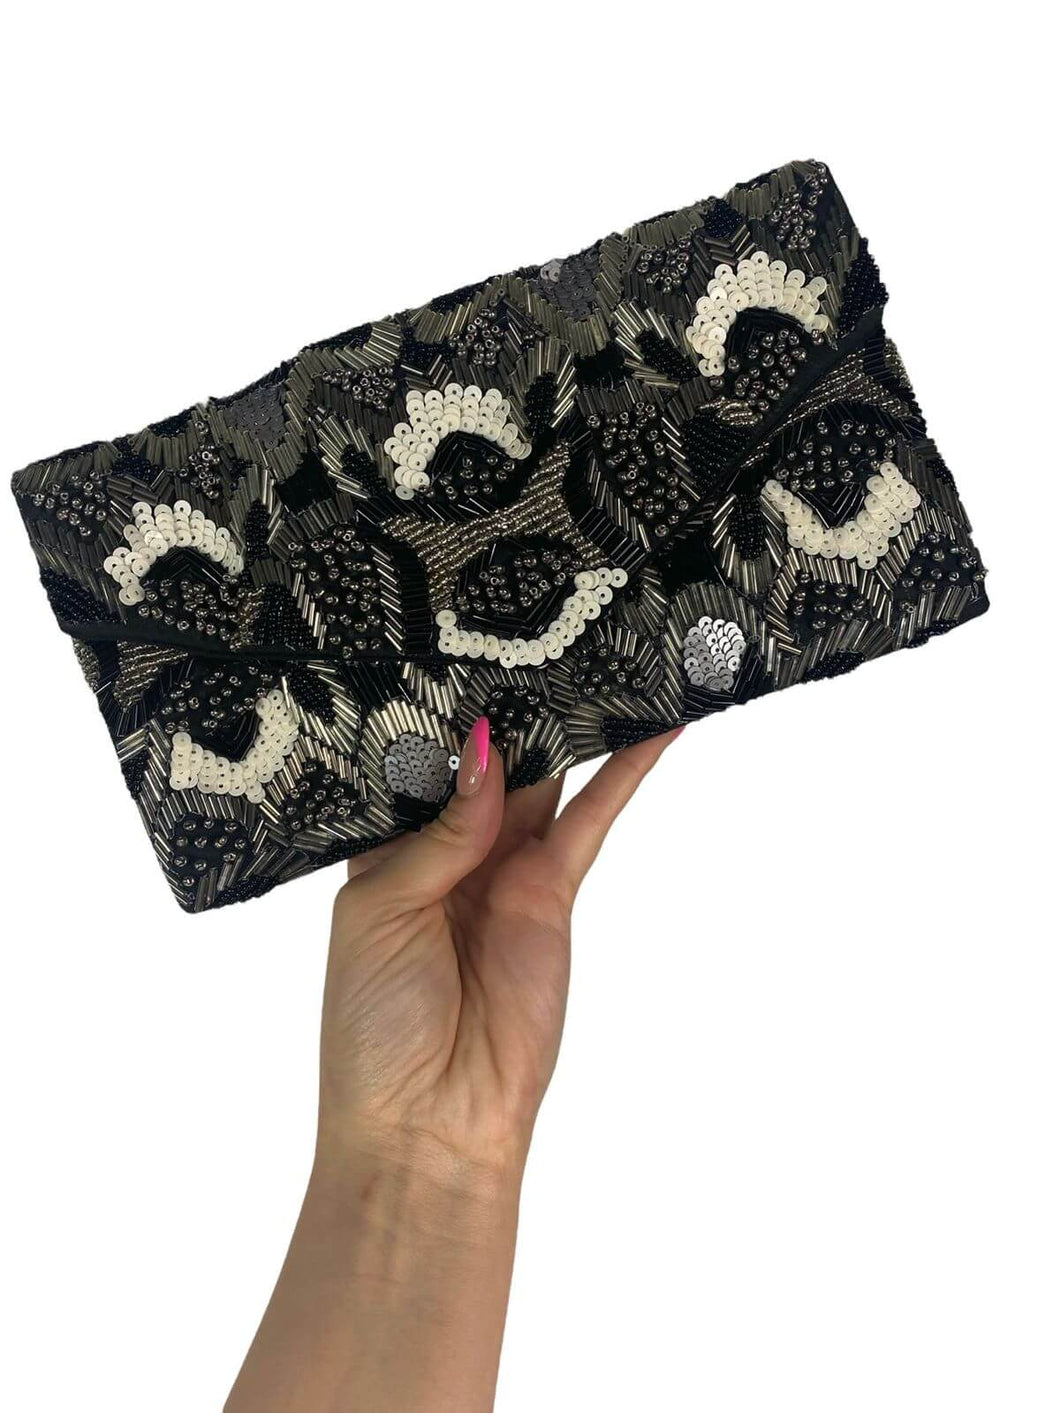 Beaded Clutch Black white and silver